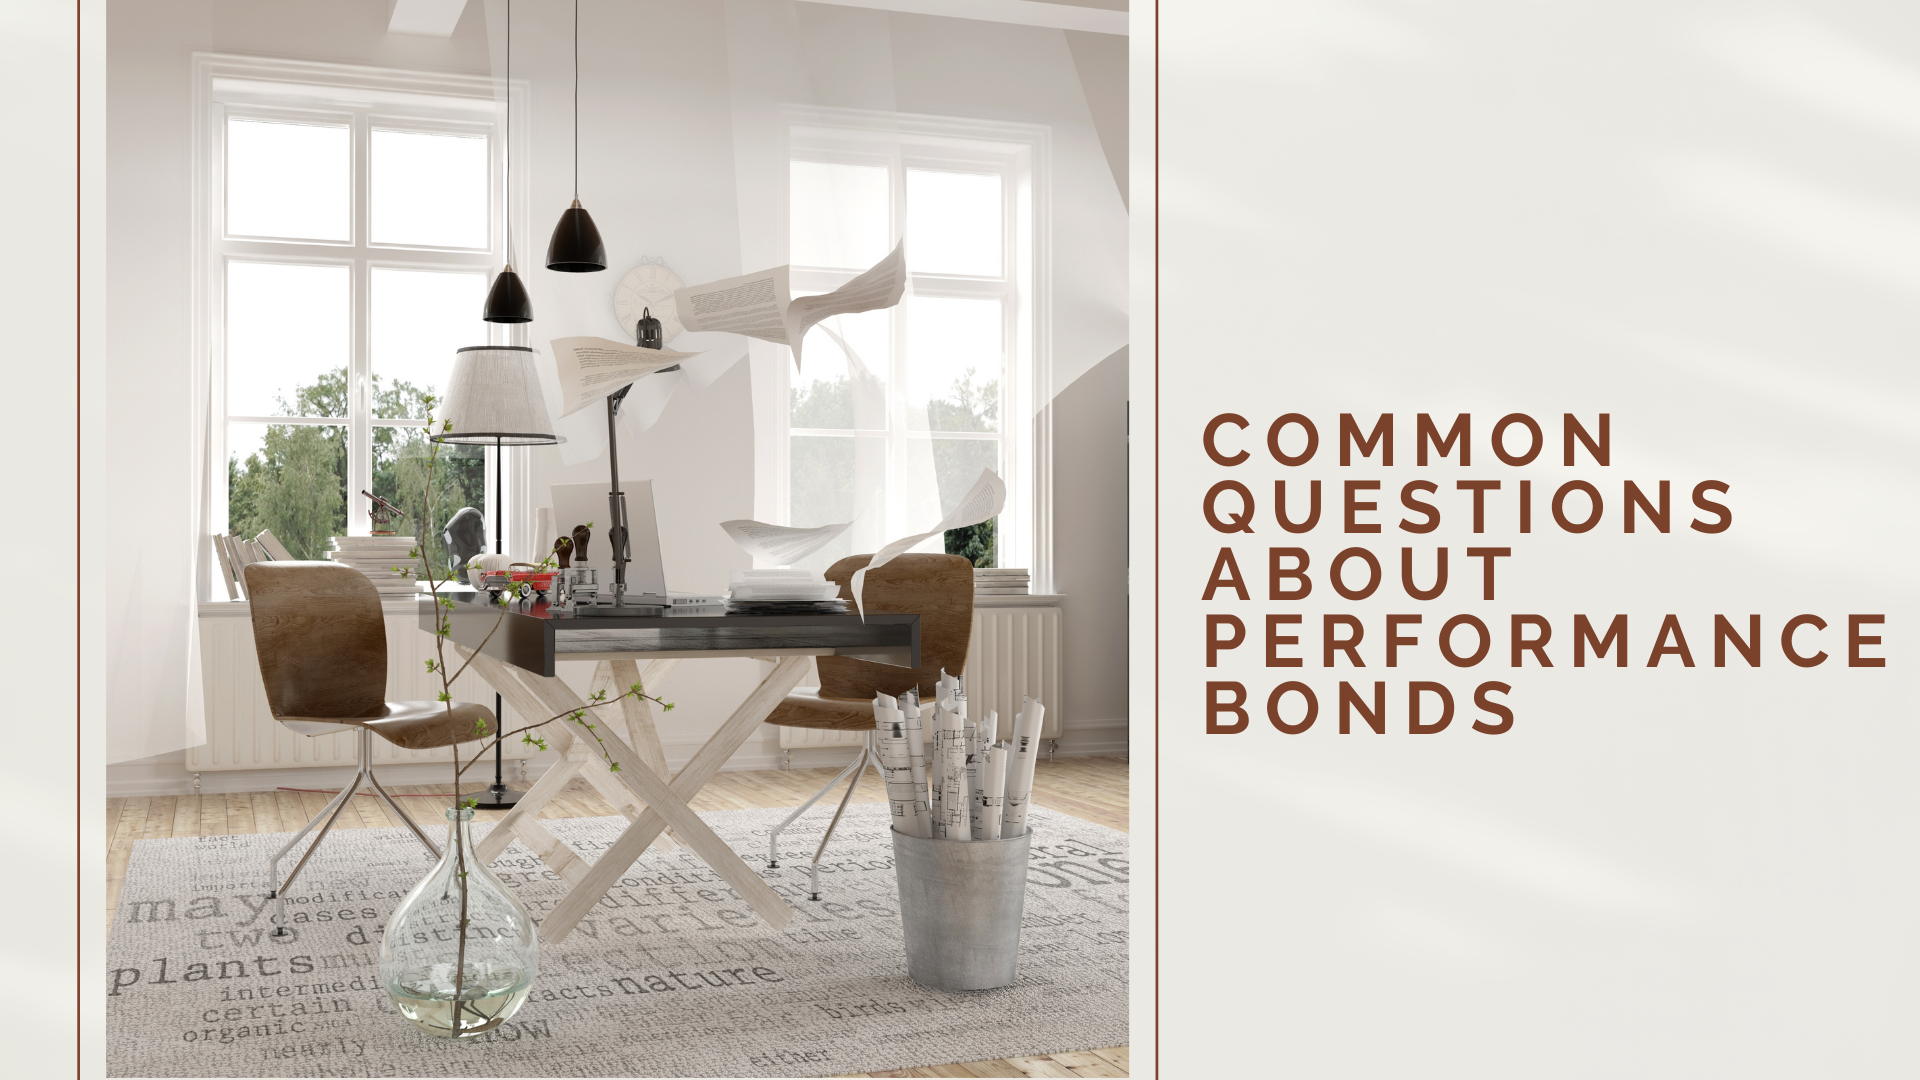 performance bonds - What is the definition of a performance bond - minimalist home